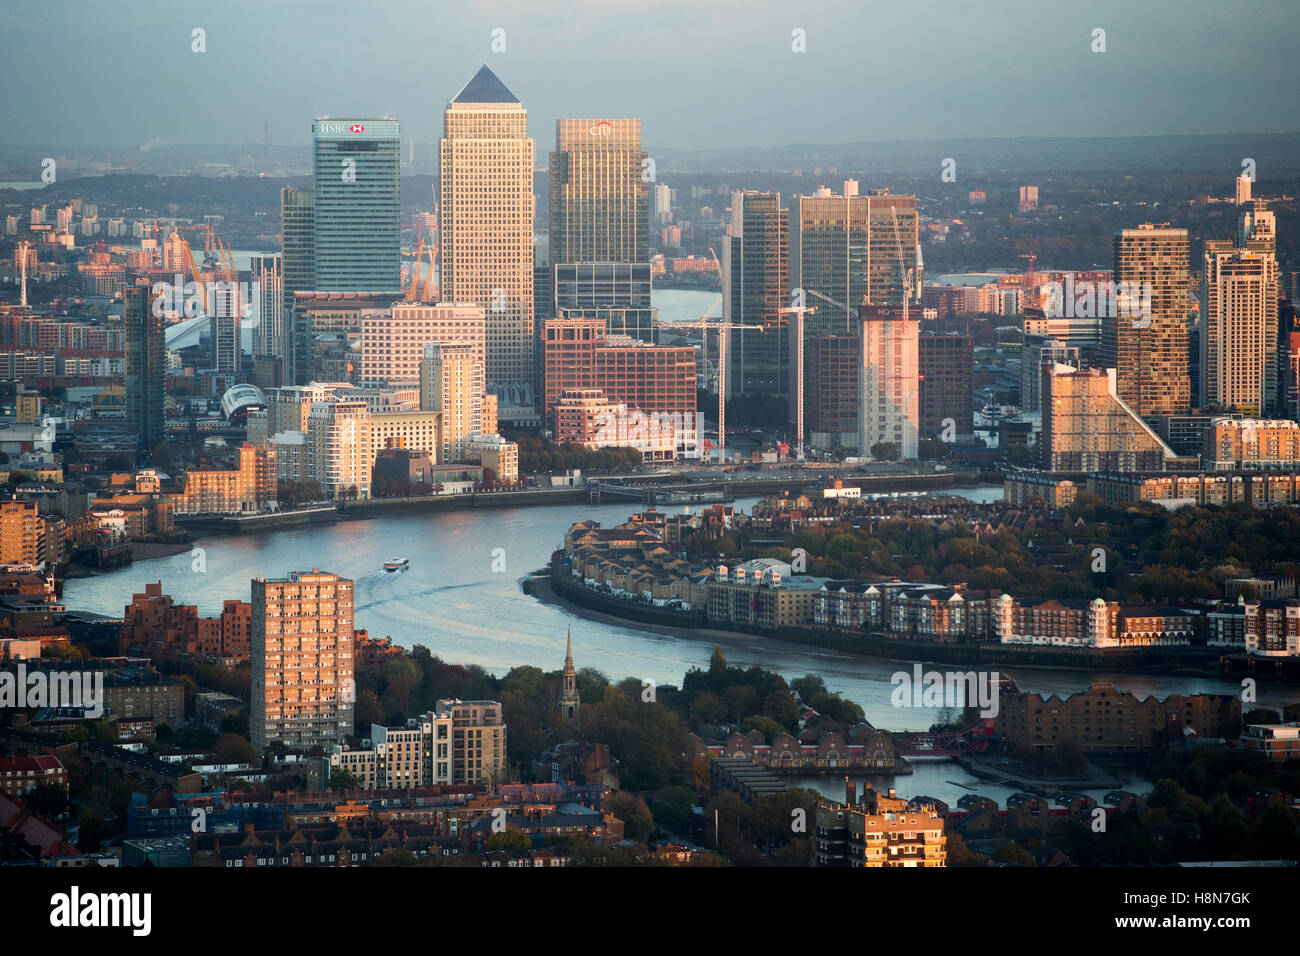 View of Canary Wharf and the financial district at dusk looking East from the City of London Stock Photo